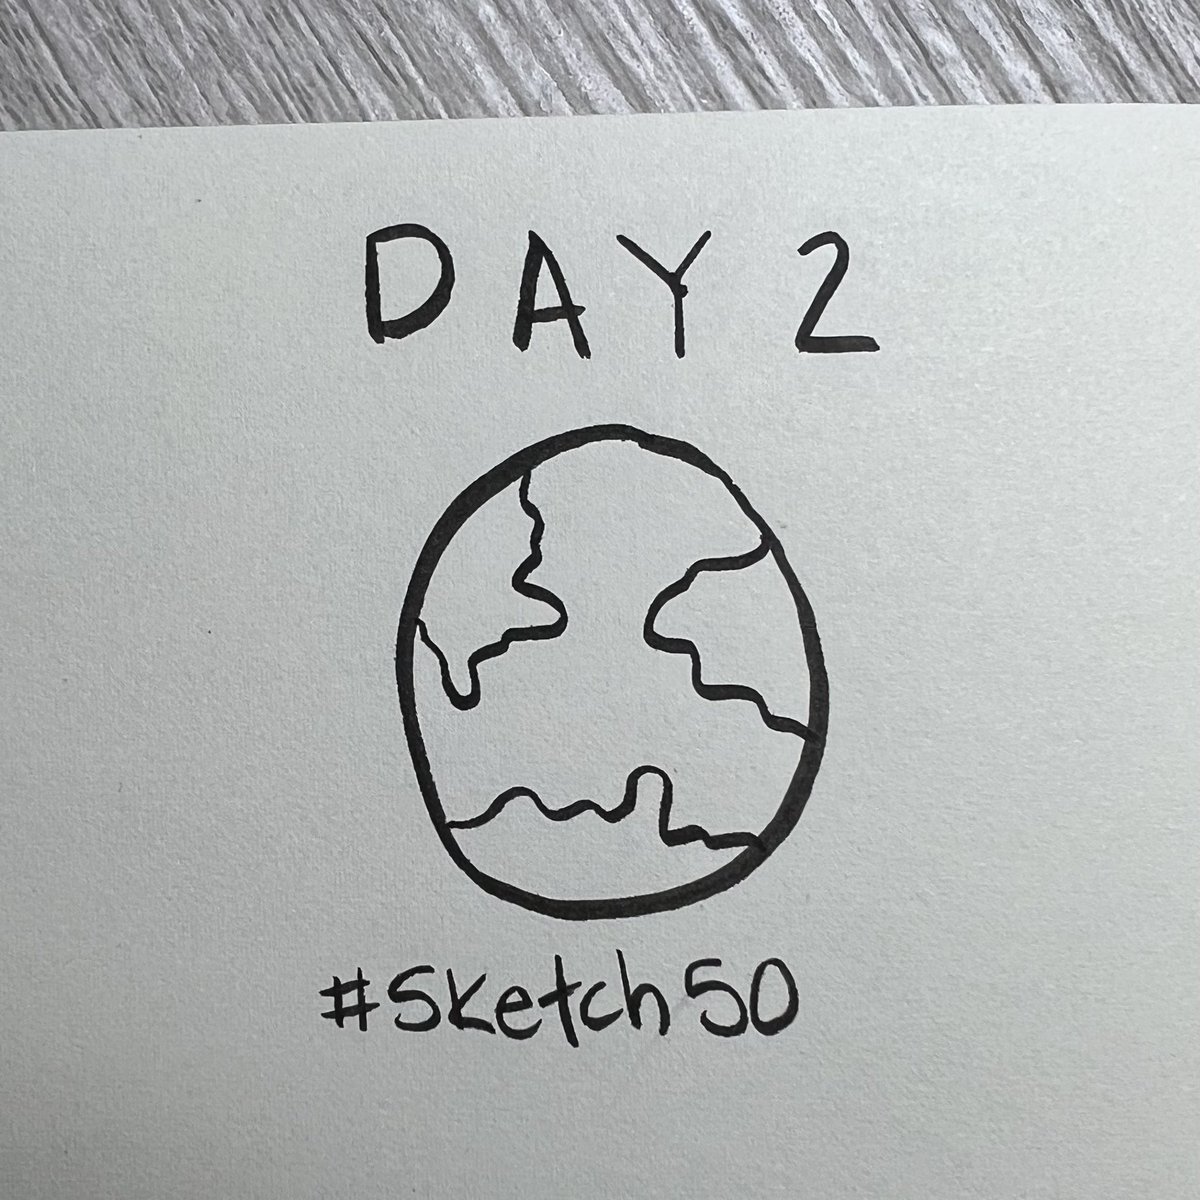 Day 2 #Sketch50 - world Do you like the filled in or the simple lines? I can’t decide…